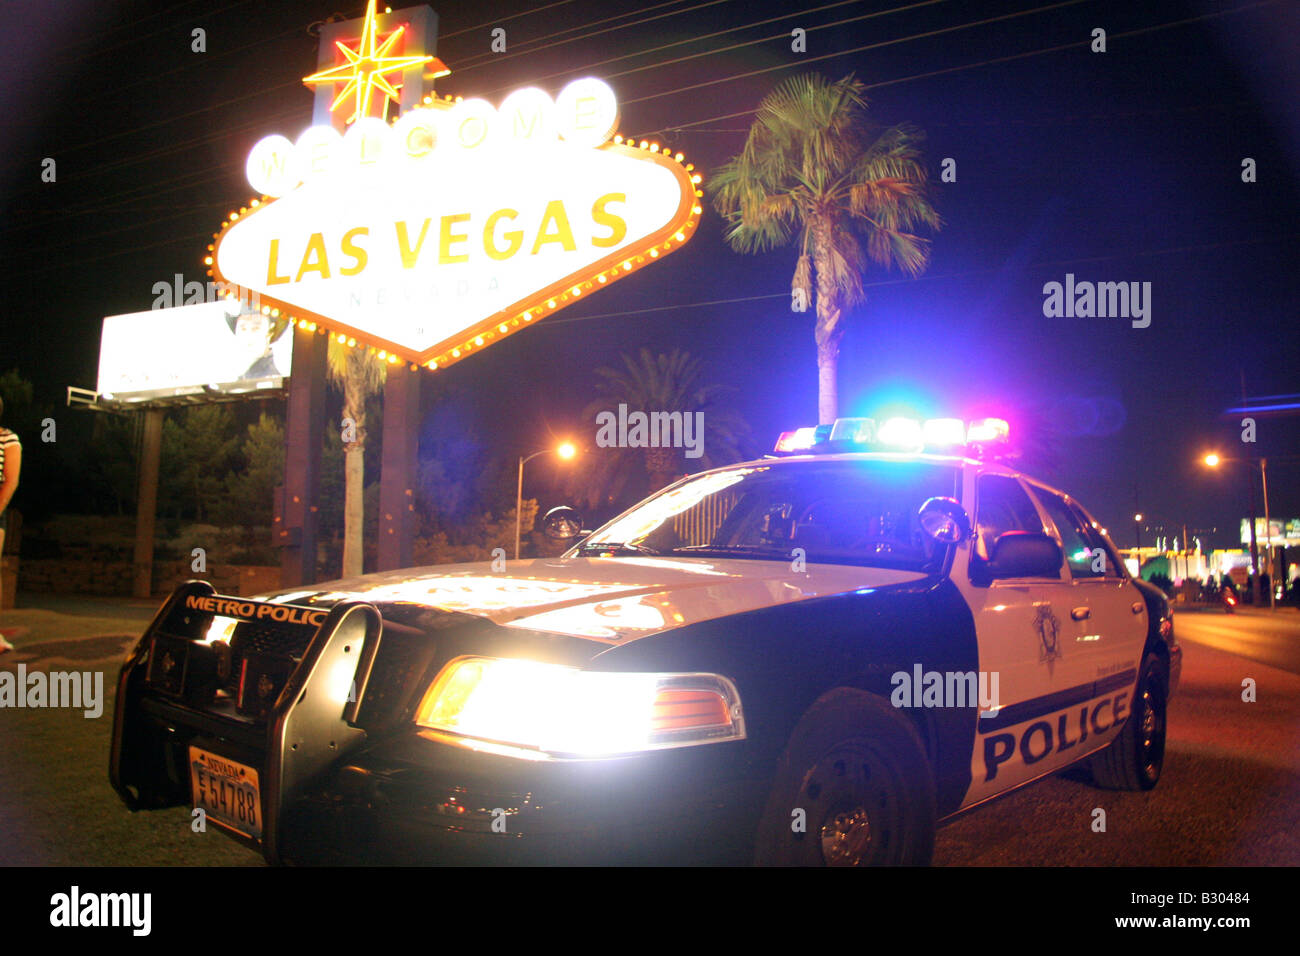 Las Vegas sign and police car Stock Photo